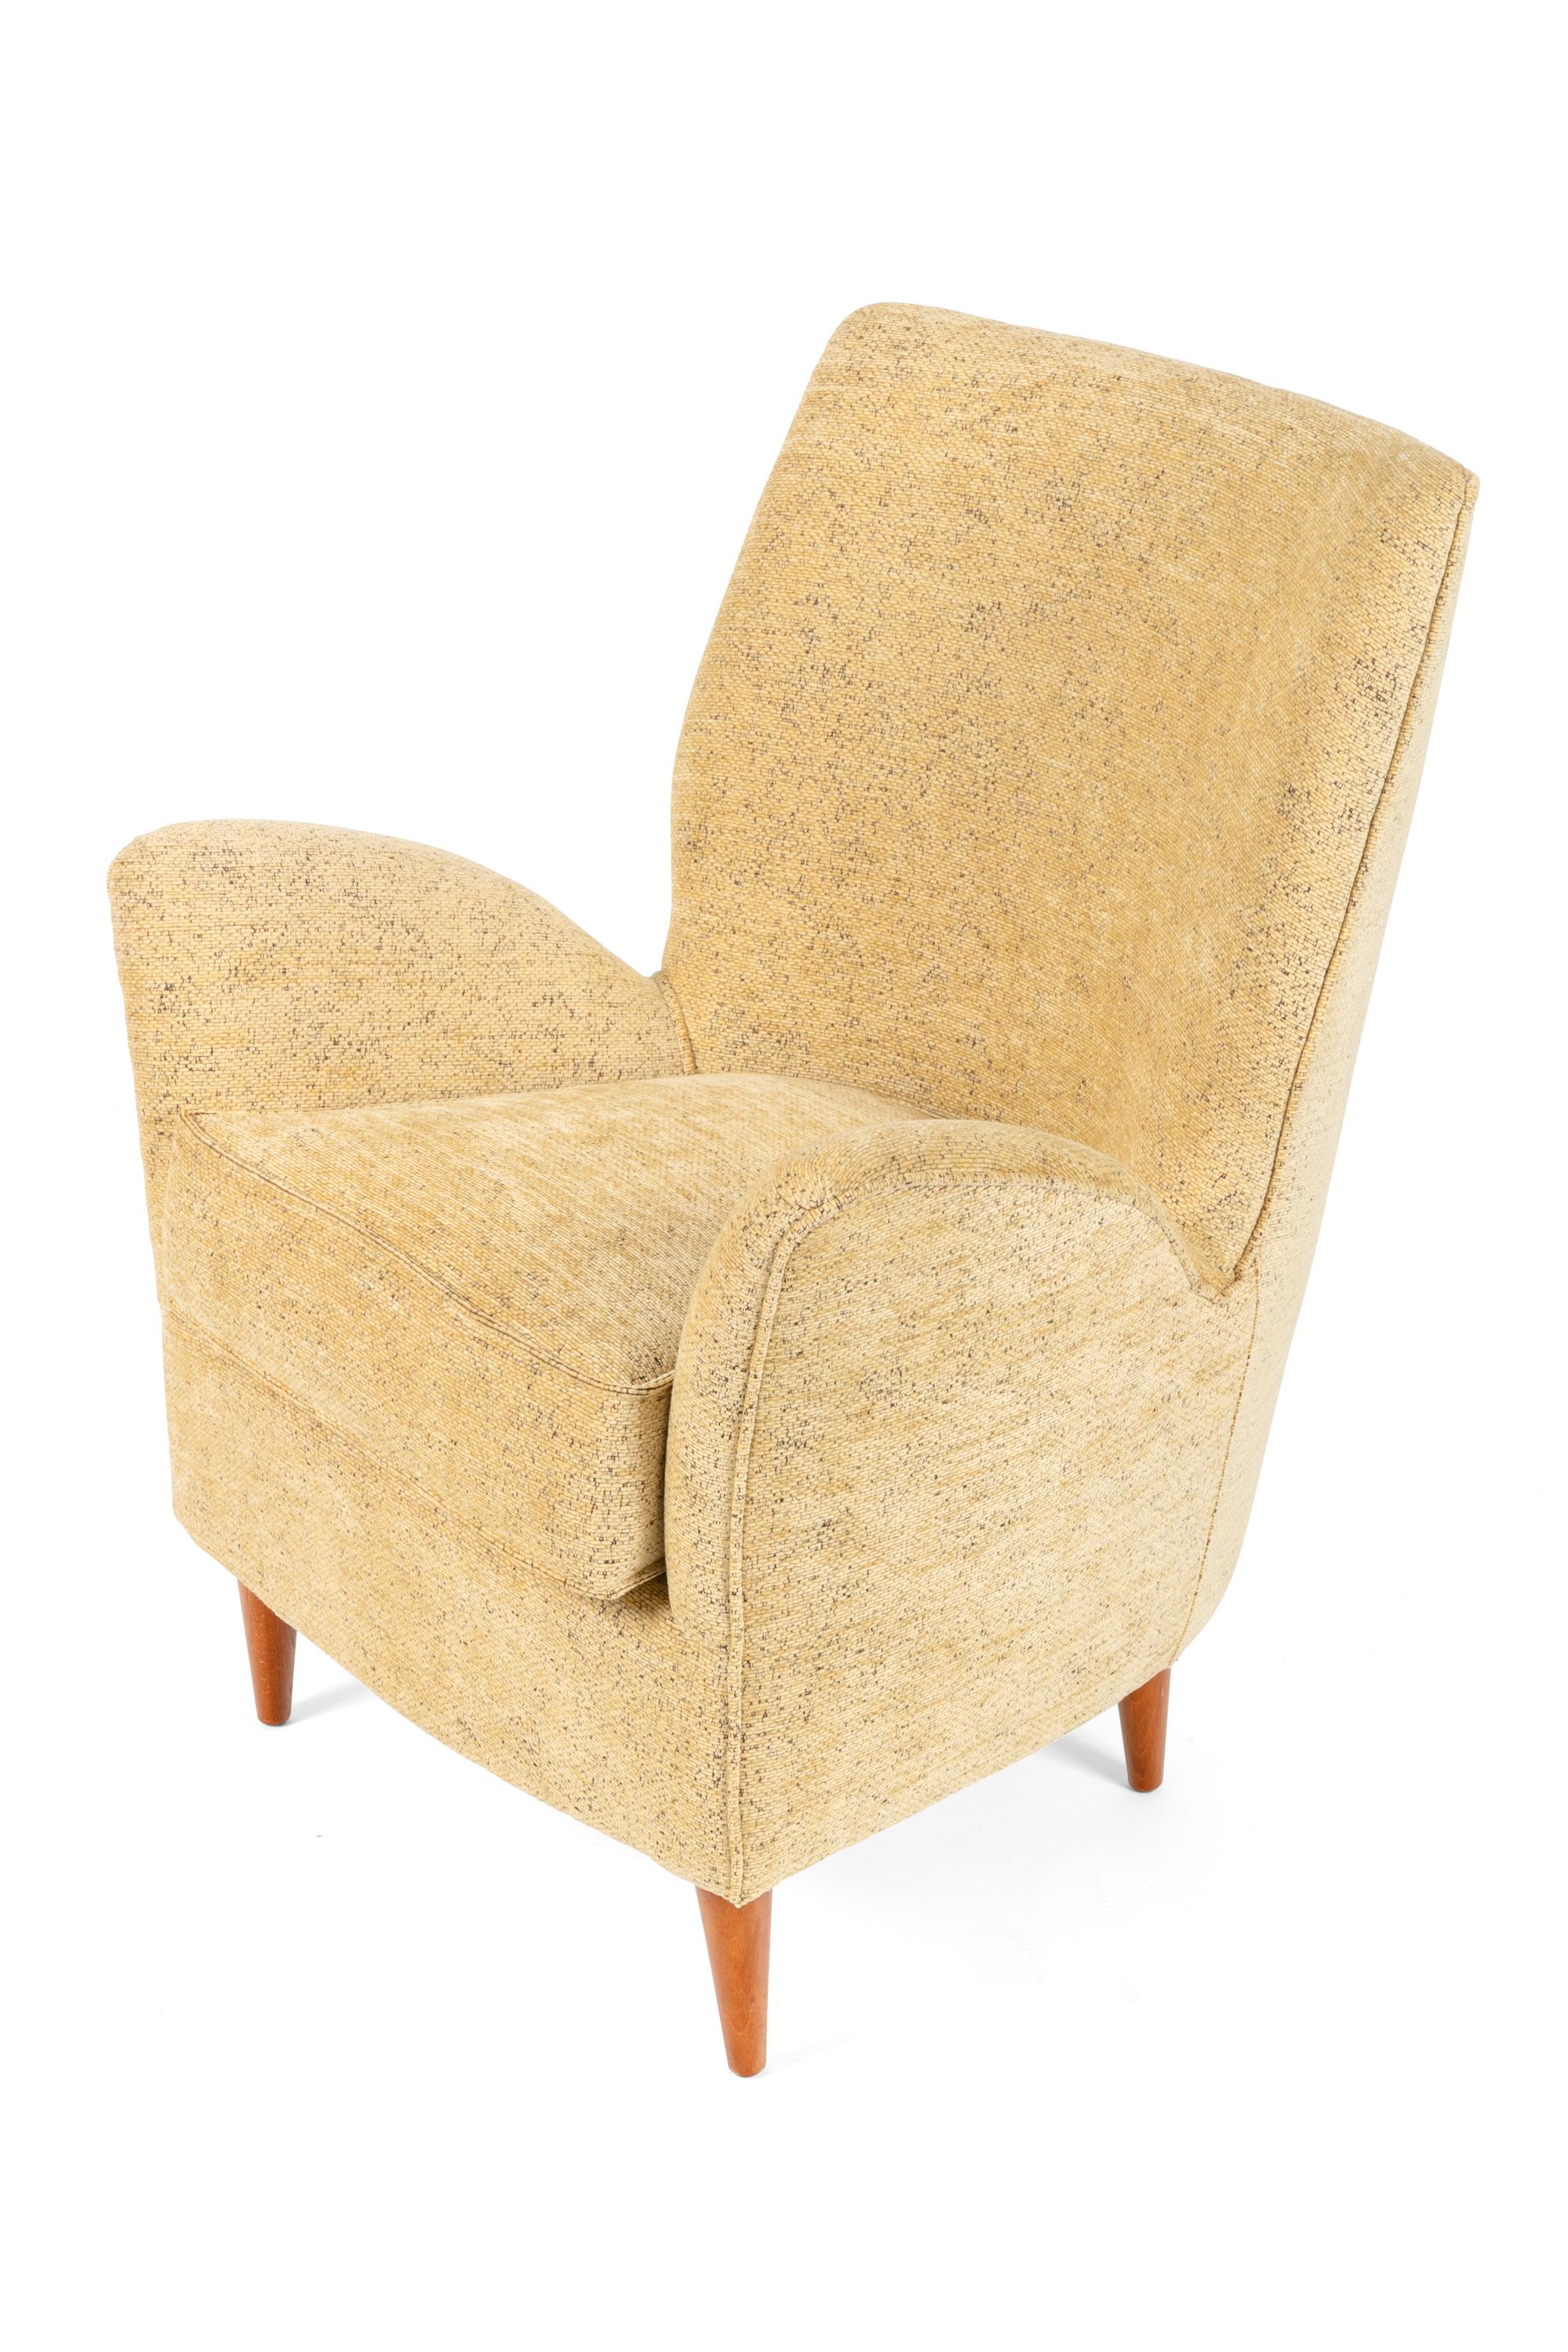 These comfortable lounge chair are in the style of the finest Italian designers of the period. They are well proportioned but are somewhat smaller than the average lounge chair which makes them perfect for smaller spaces.